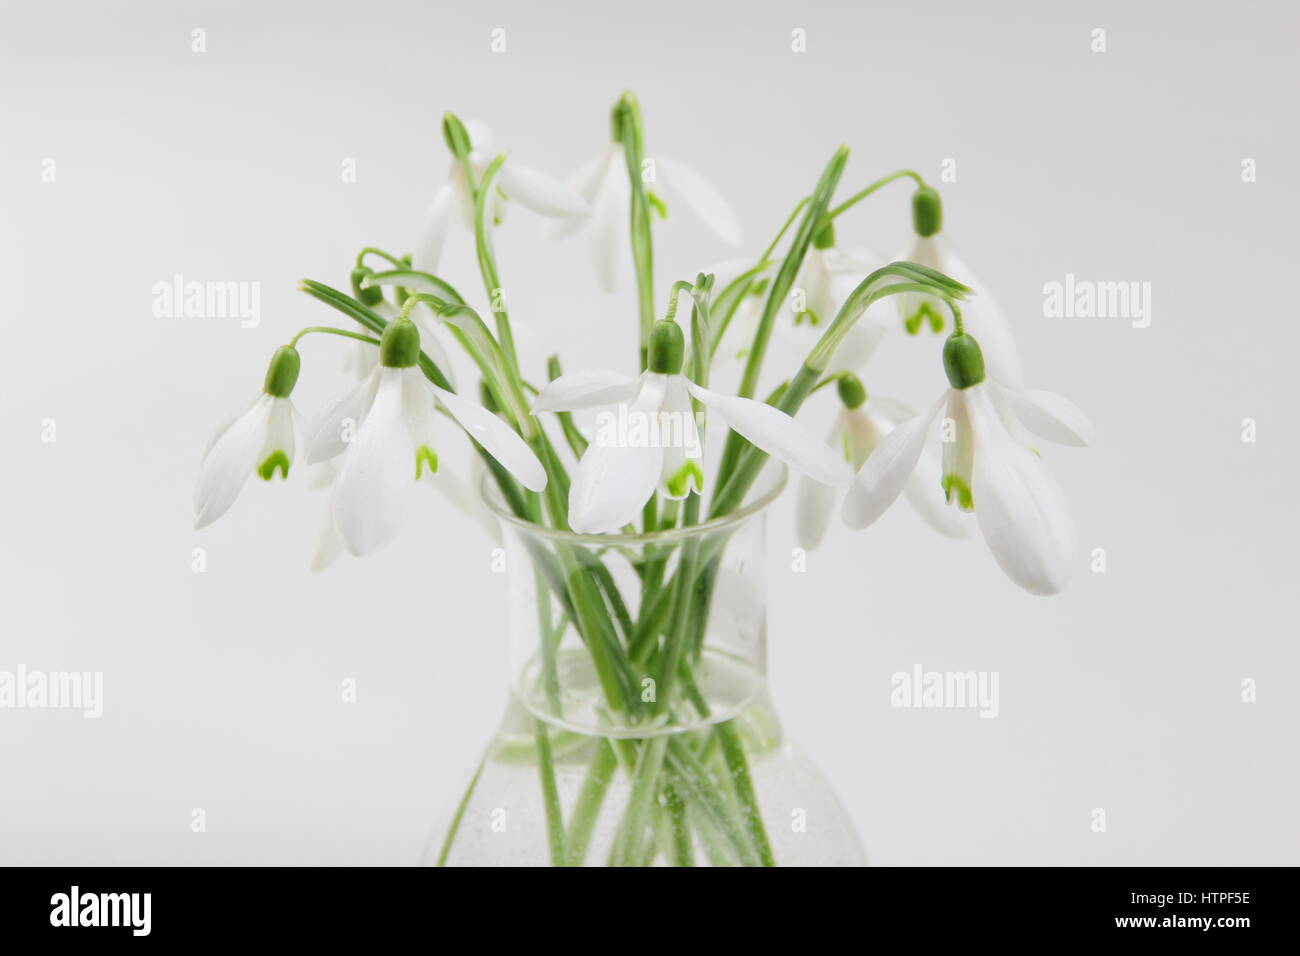 A bunch of freshly picked single flower snowdrops (galanthus) in a glass vase against white background in an English home in February Stock Photo